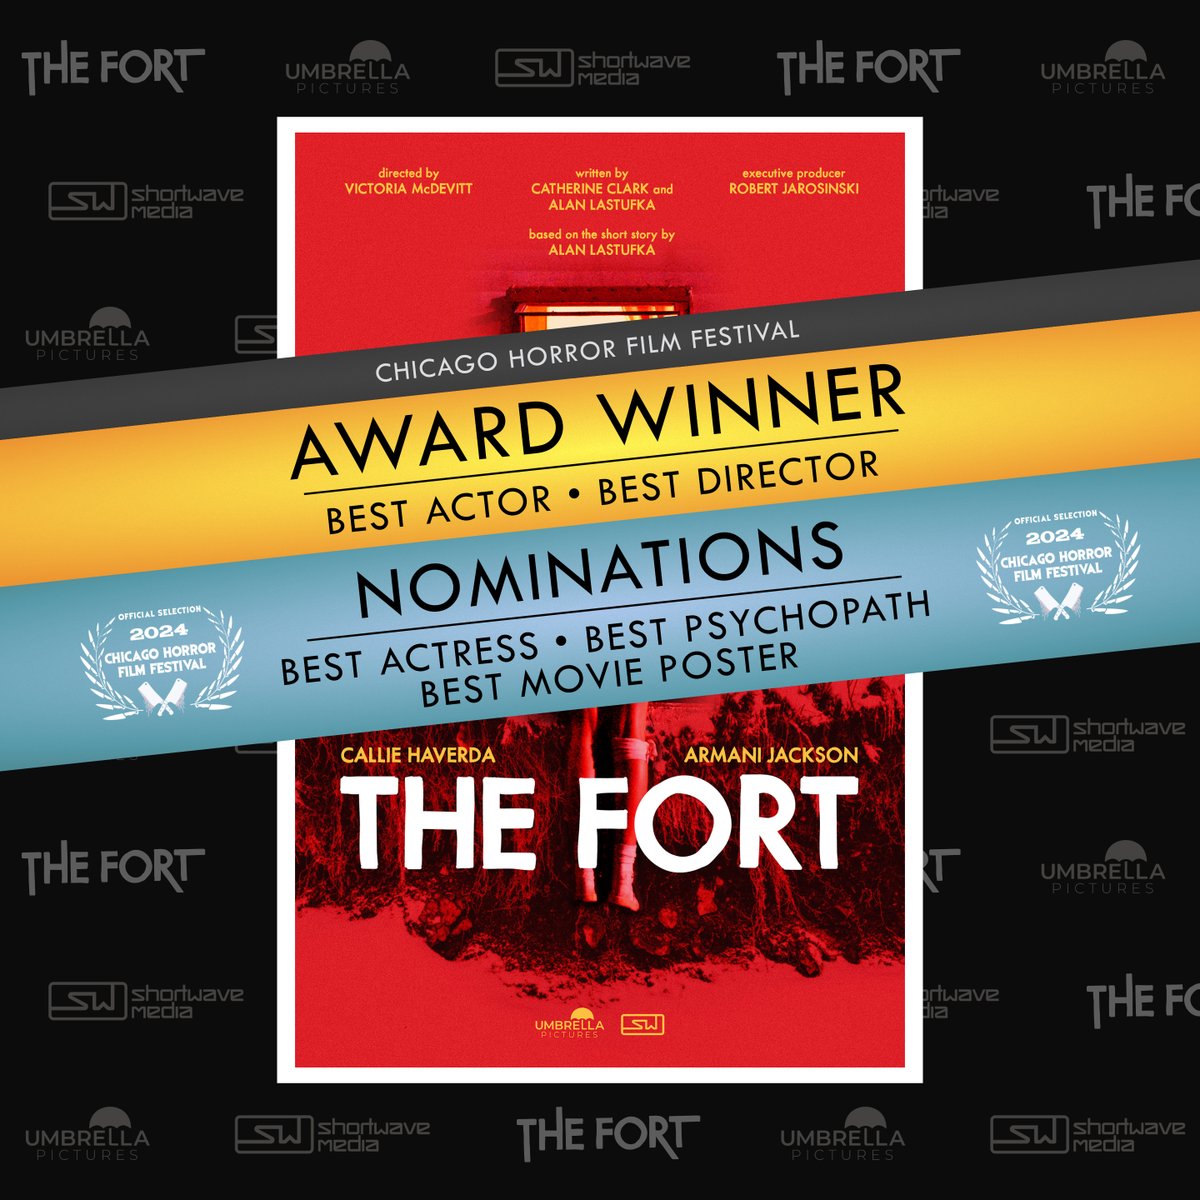 Excited to share 'THE FORT' won two of the five awards we were nominated for at our premieres yesterday! • Best Actor - WINNER! • Best Actress - Nominated • Best Director - WINNER! • Best Psychopath - Nominated • Best Movie Poster - Nominated Not bad for our first showing!